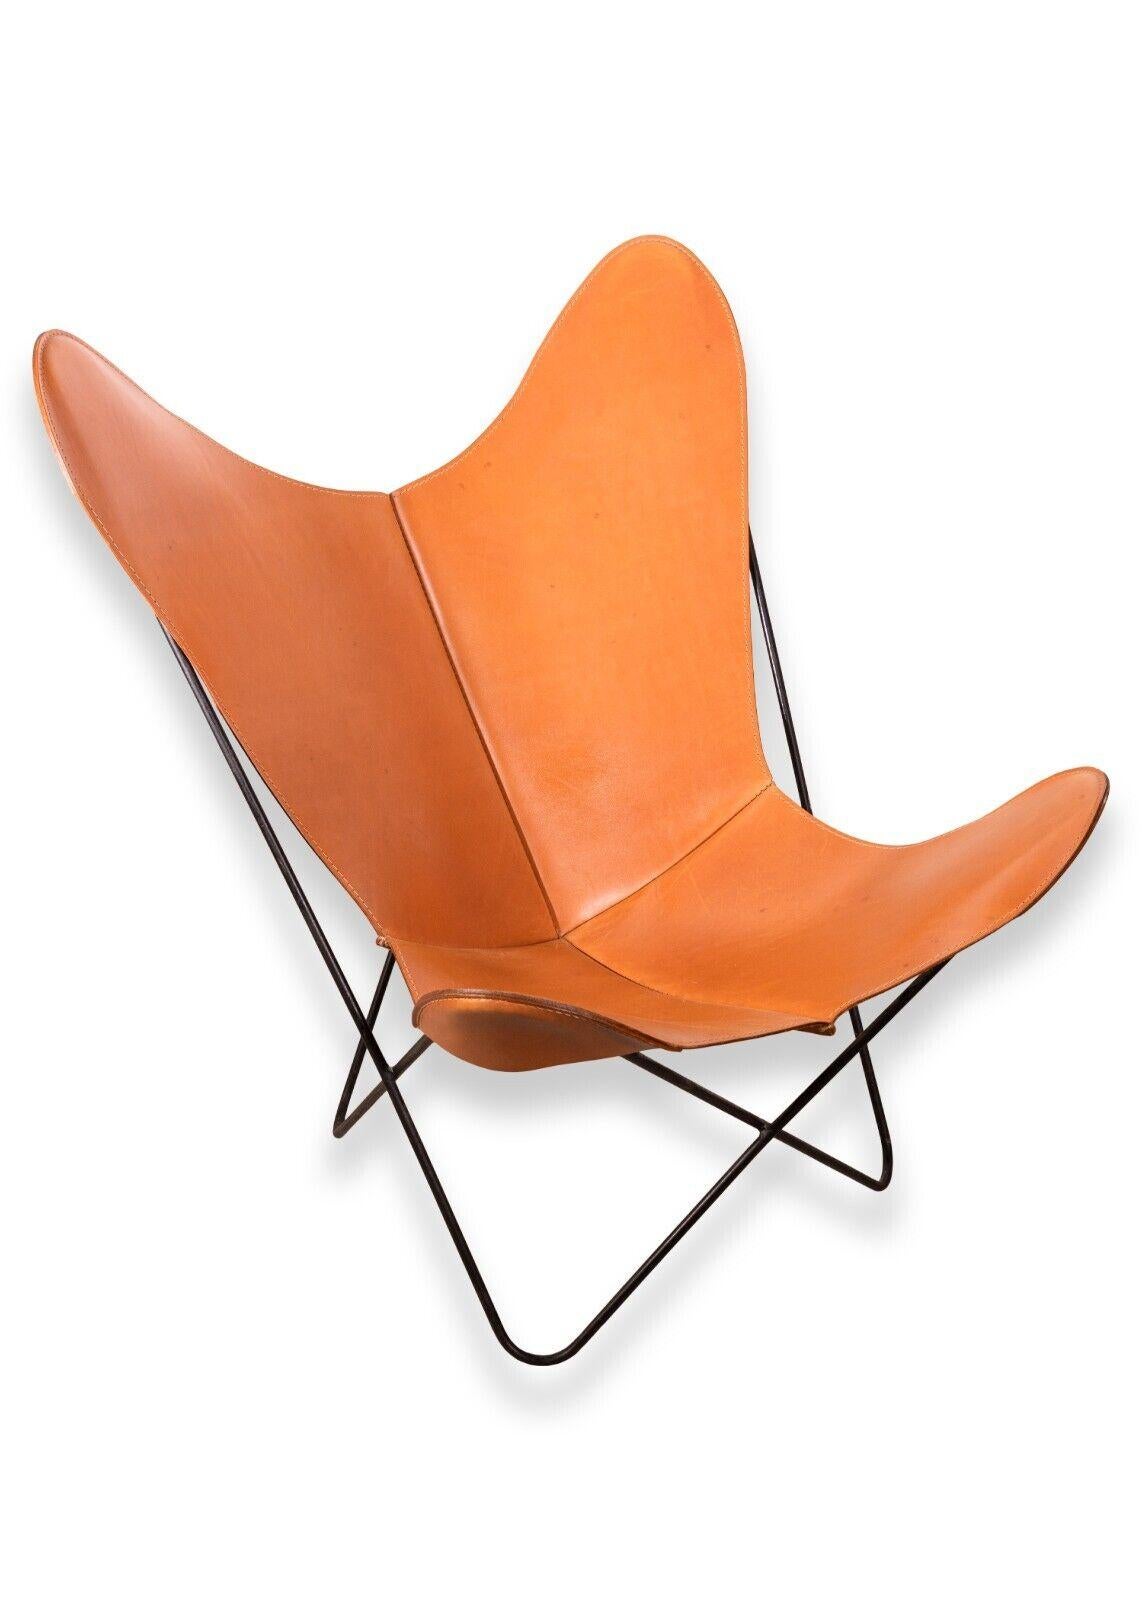 A pair of Knoll leather cognac butterfly chairs. A marvelous set of butterfly chairs from Knoll. These iconic chairs feature a rich cognac brown leather. The leather is in fantastic condition. It still sits very comfortably, and doesn't hold any bad